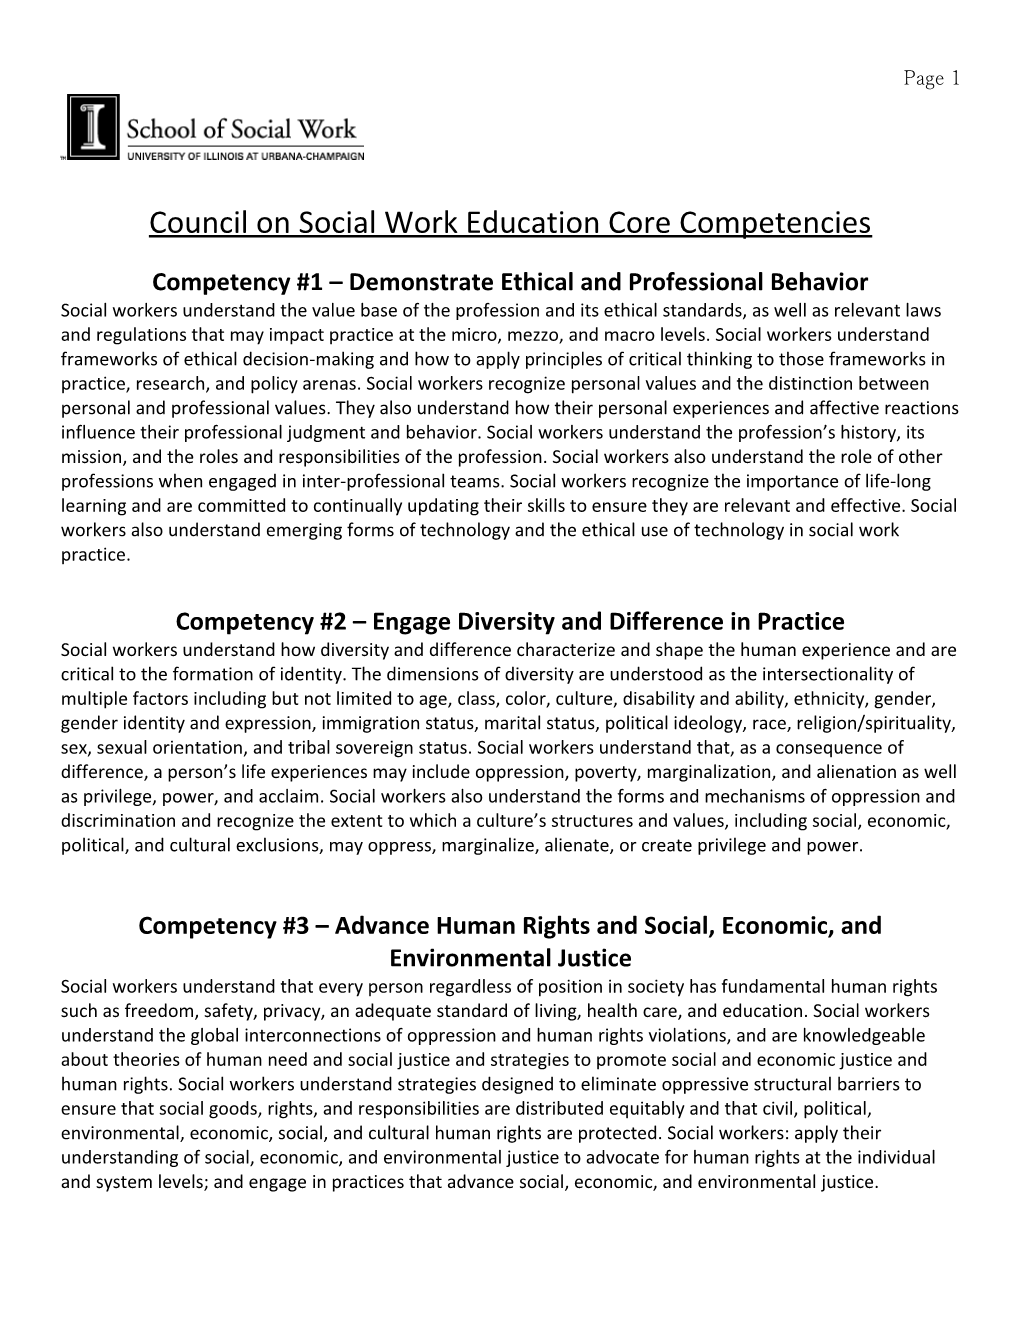 Foundation Course: Socw 451